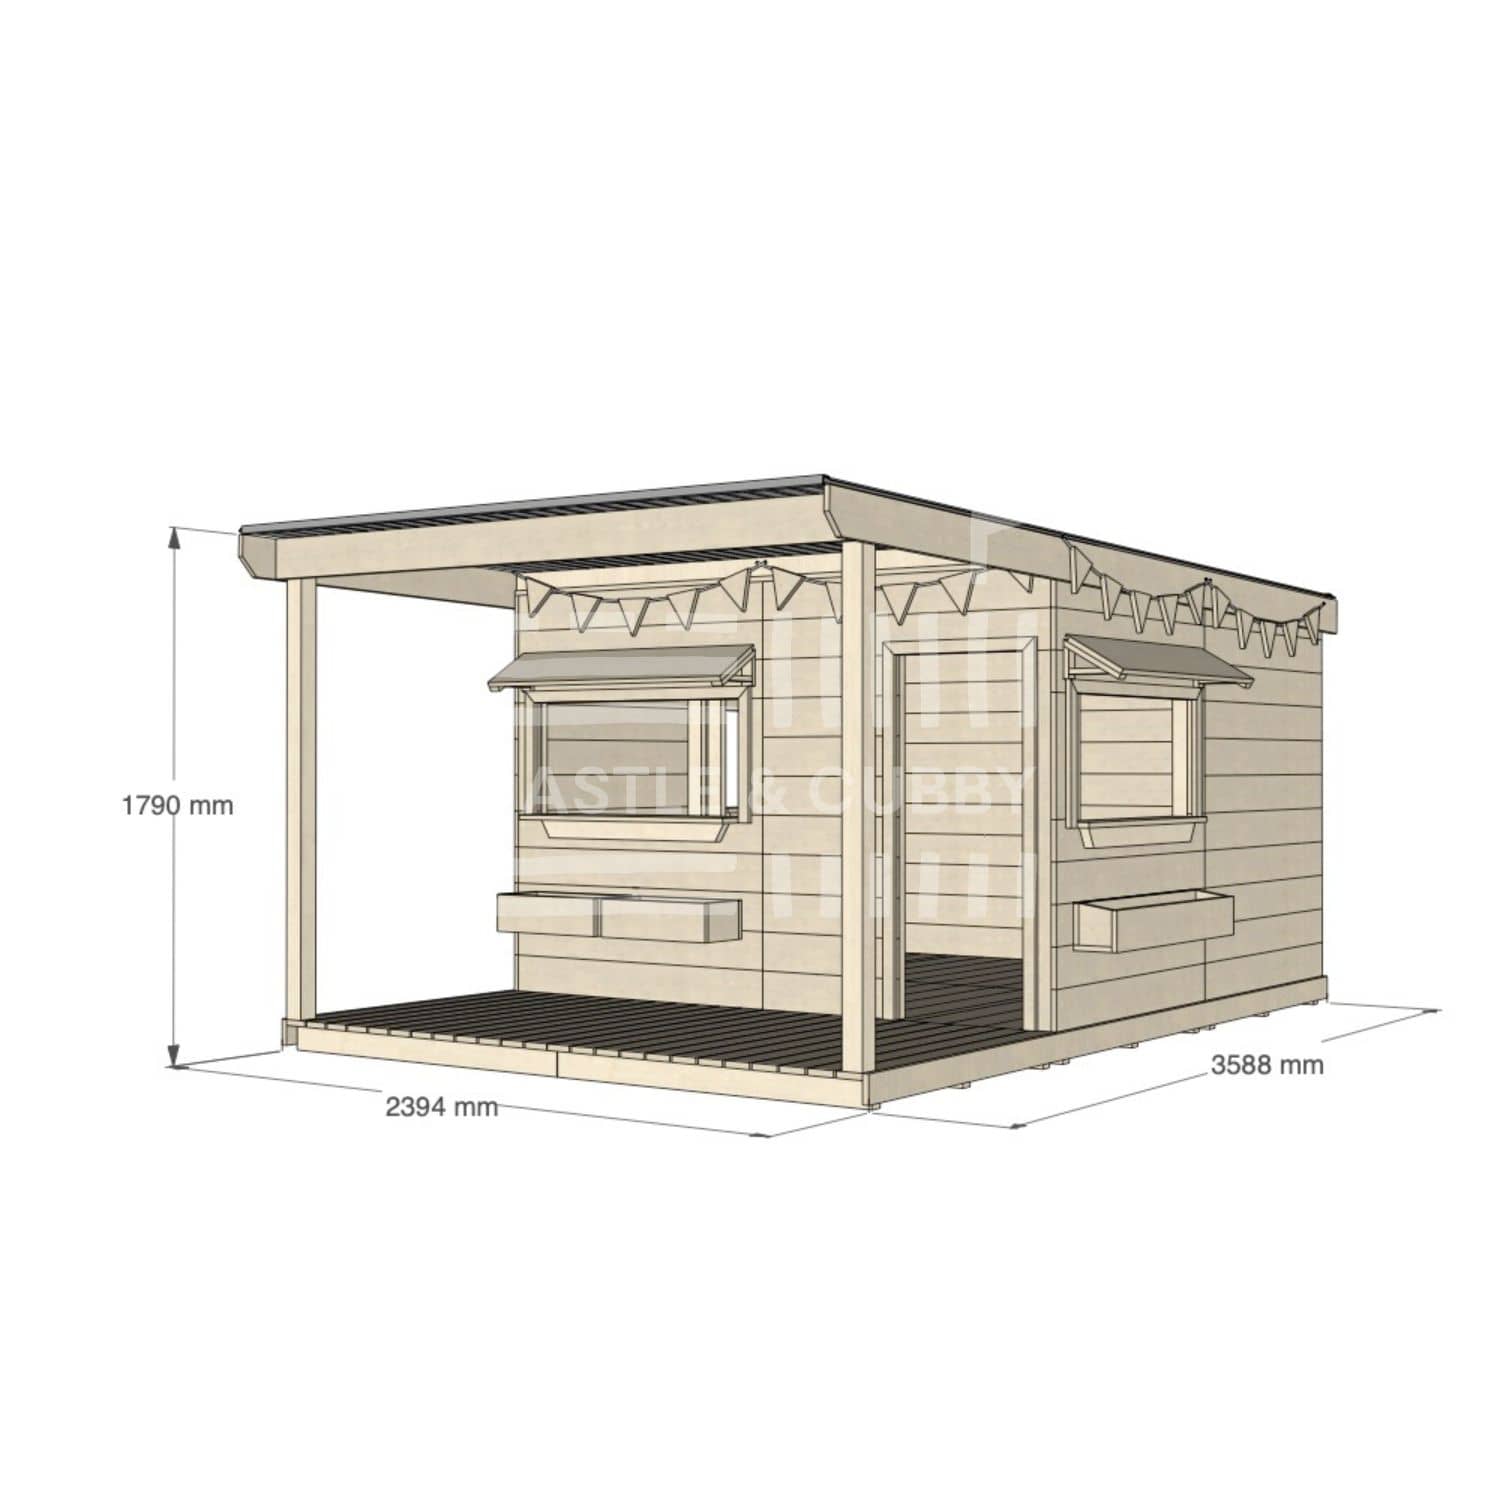 A commercial grade pine large square cubby house with front verandah and accessories package